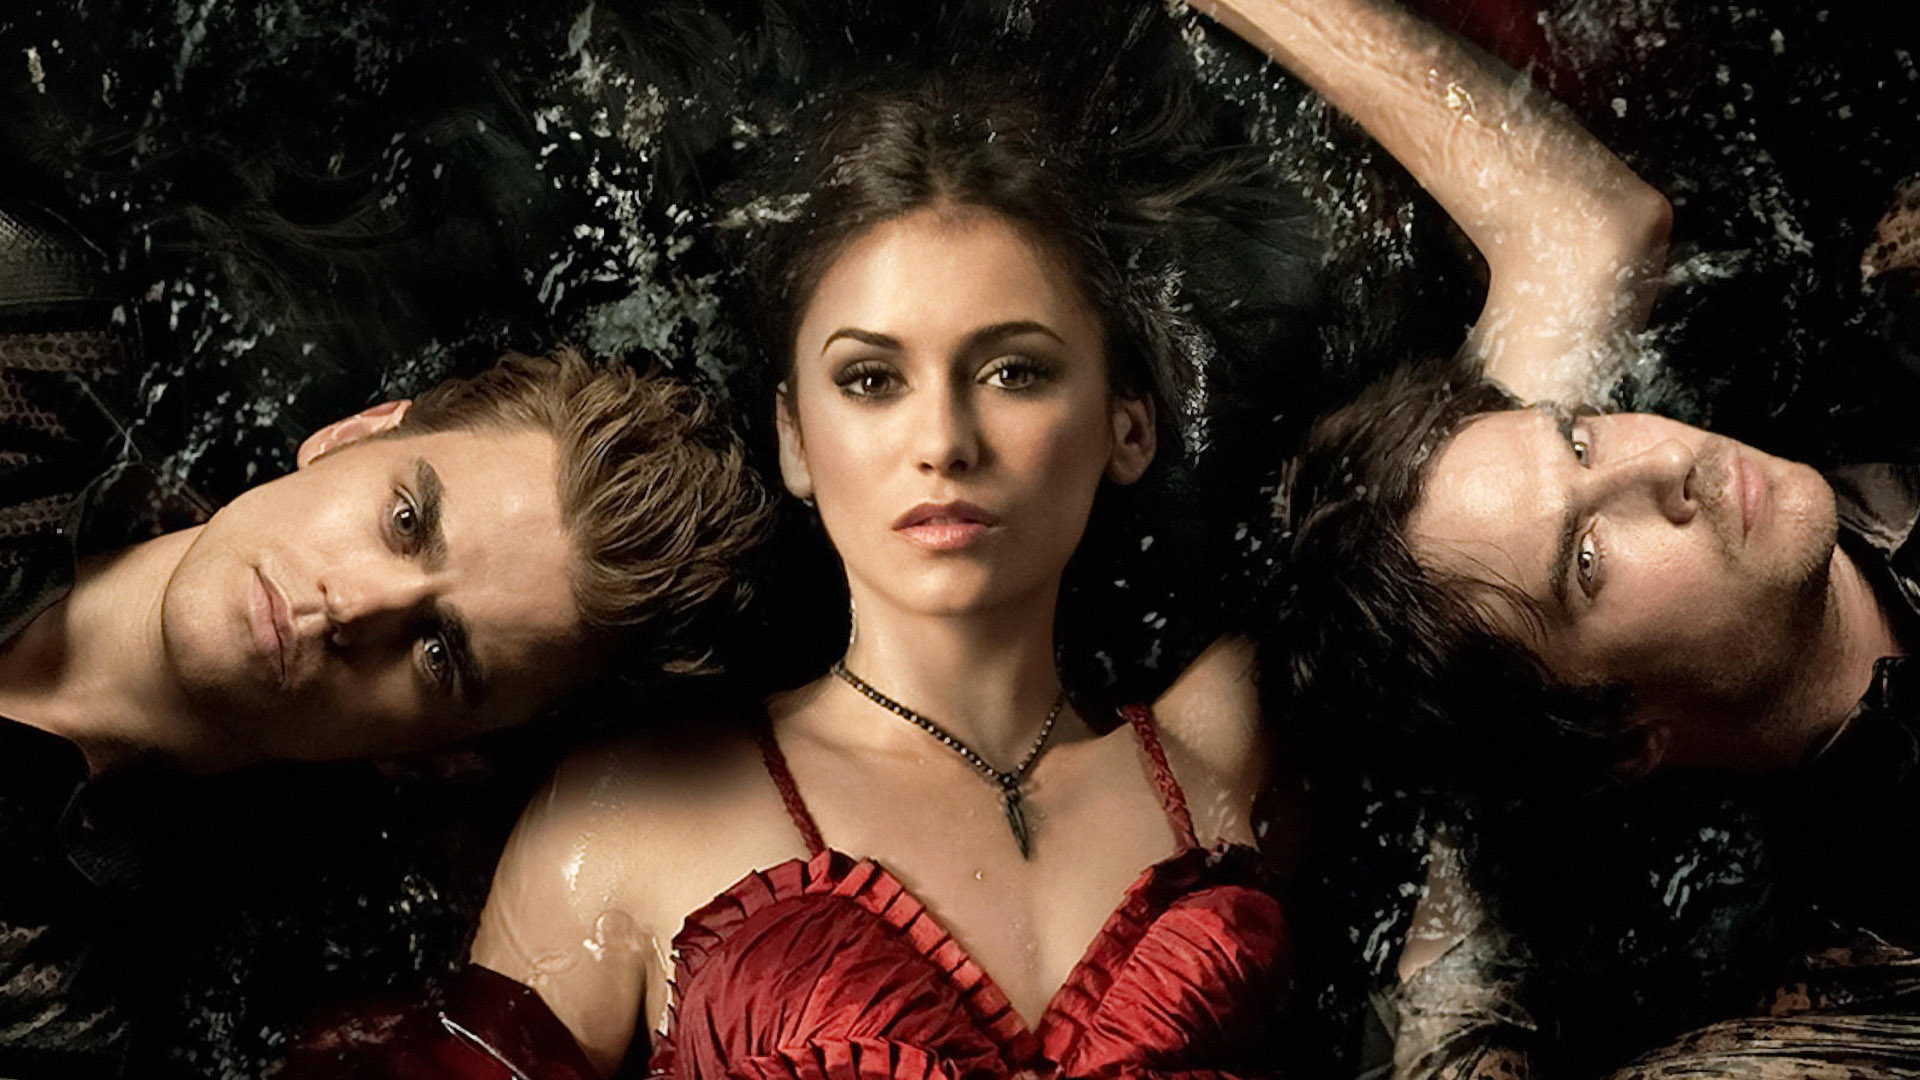 Vampire Diaries Still Holds Up 14 Years Later, and There's a Reason for That